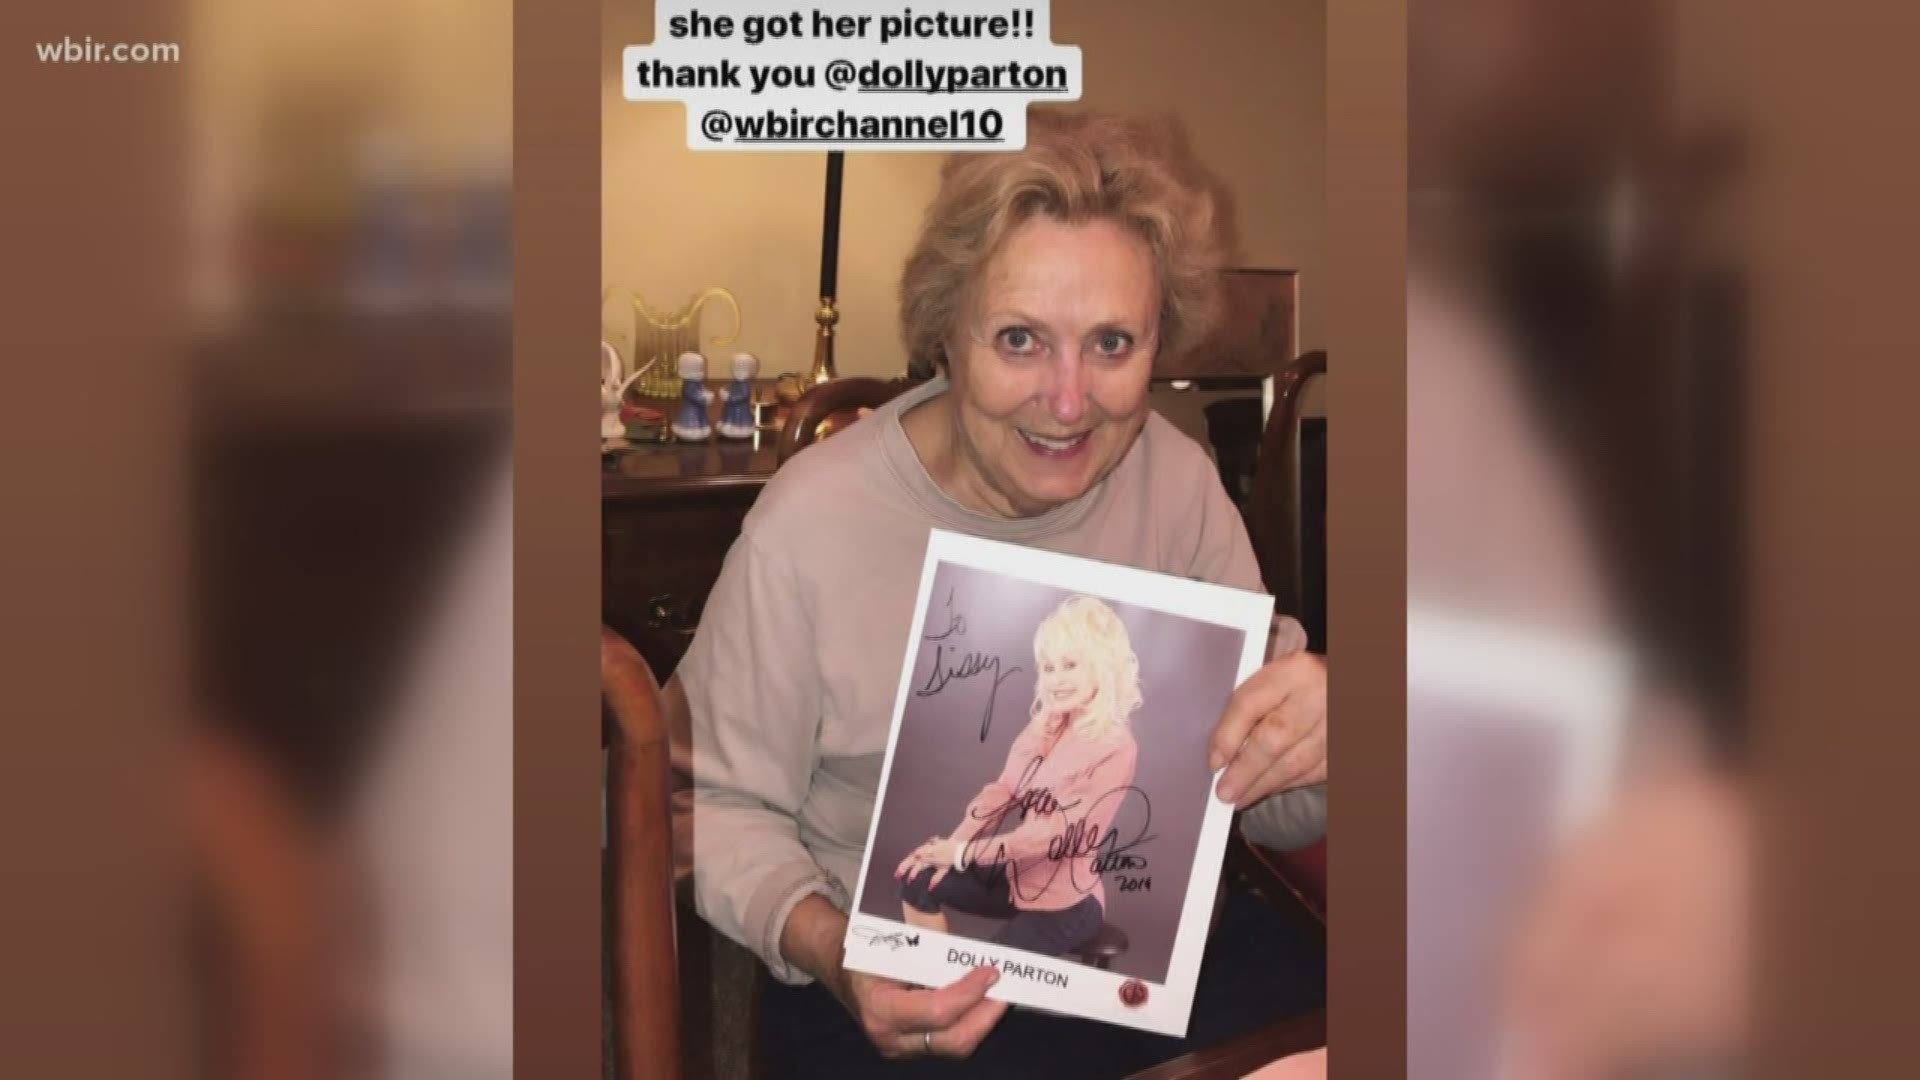 A Farragut, Tennessee woman lost her home -- and her treasured Dolly Parton autograph -- in a fire. A replacement from Dolly herself just arrived.